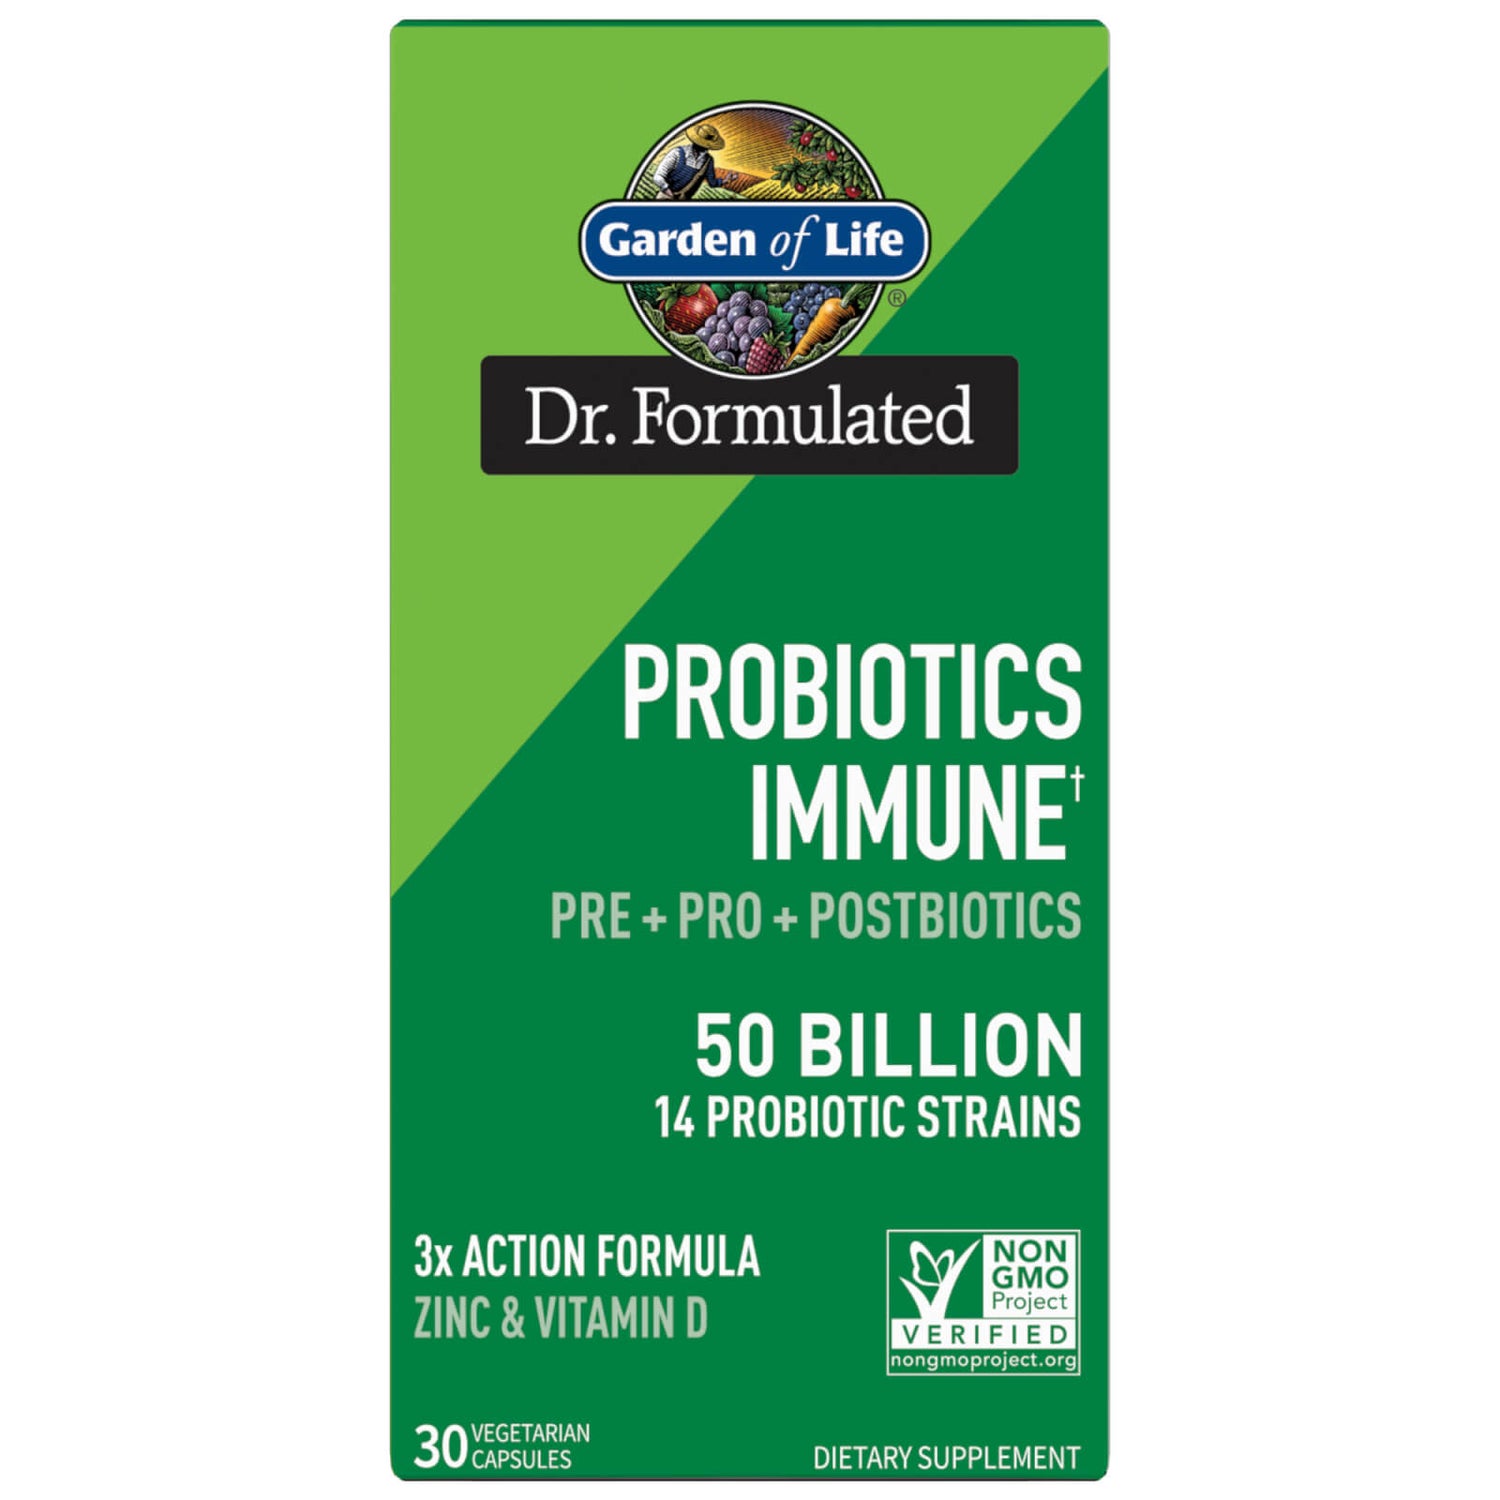 Dr. Formulated Microbiome Immune